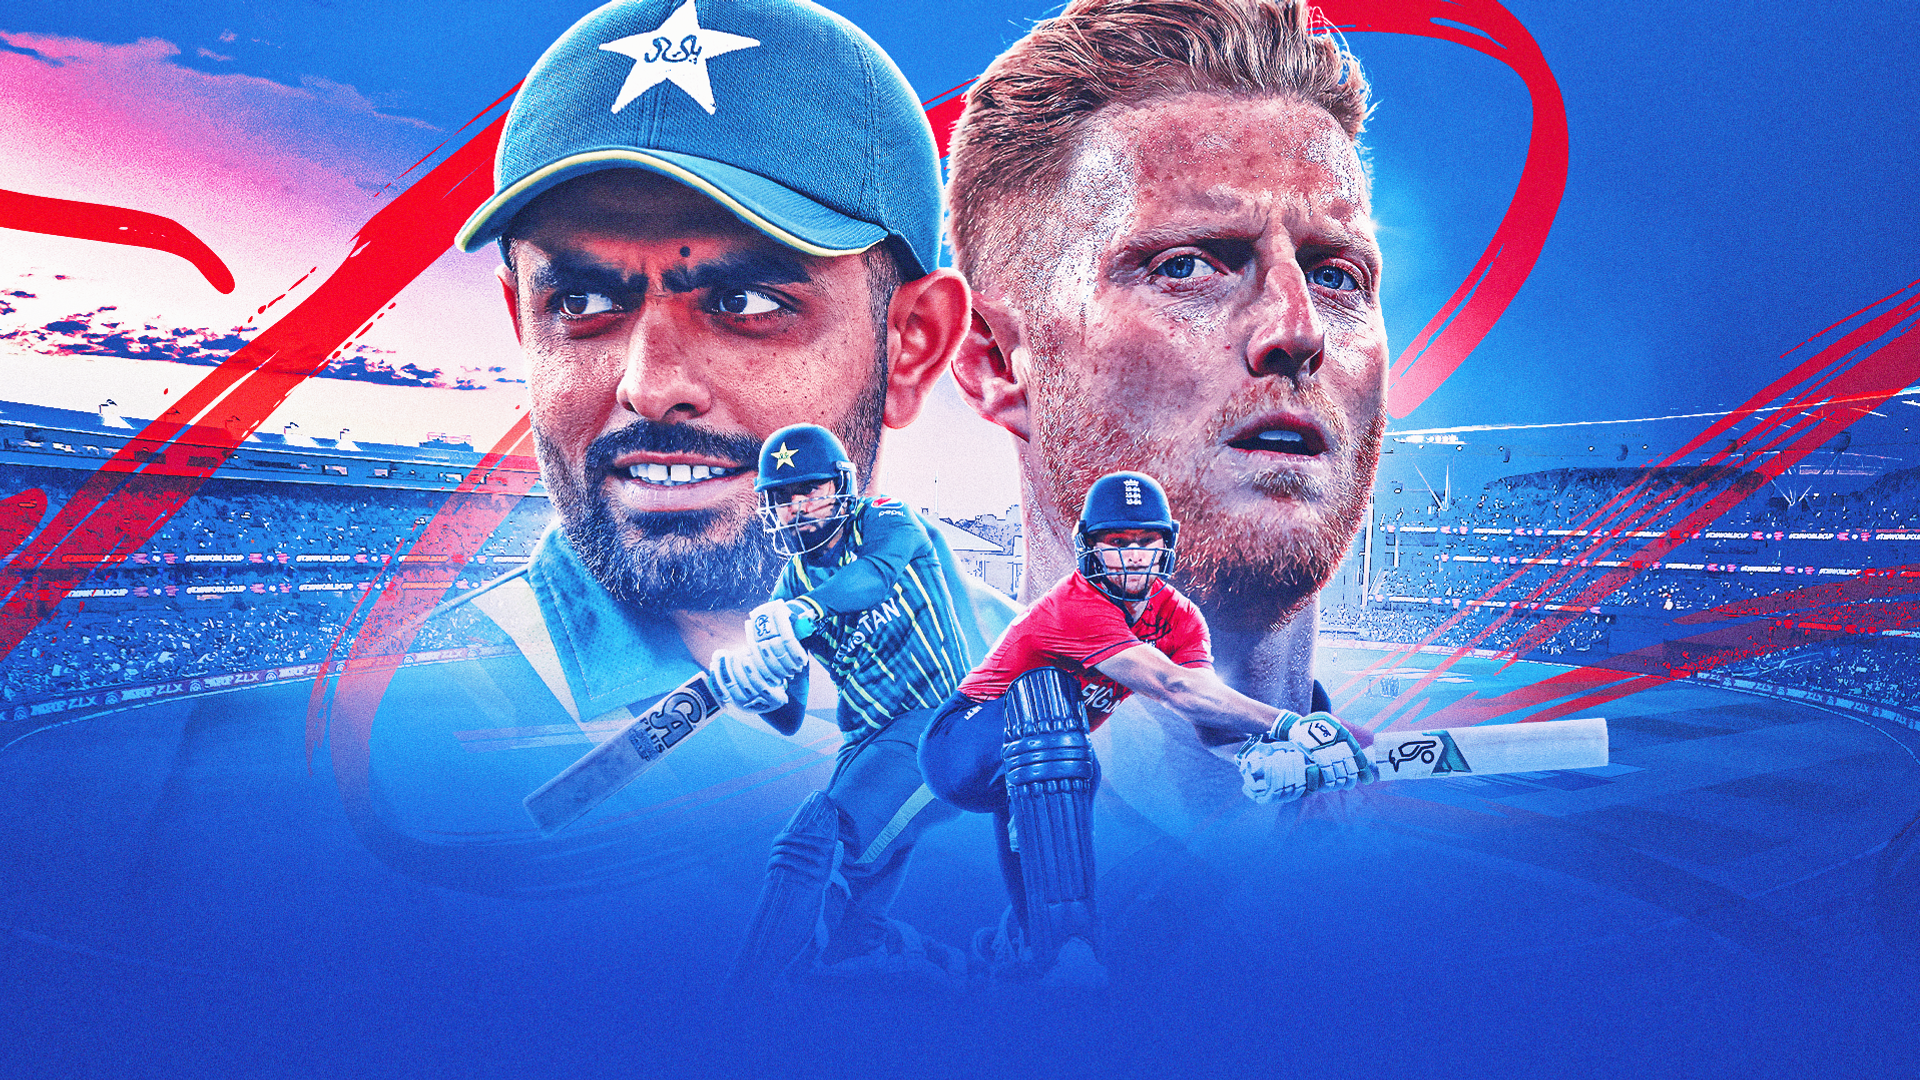 England bowl vs Pakistan in T20 World Cup remaining LIVE!SkySports | Information